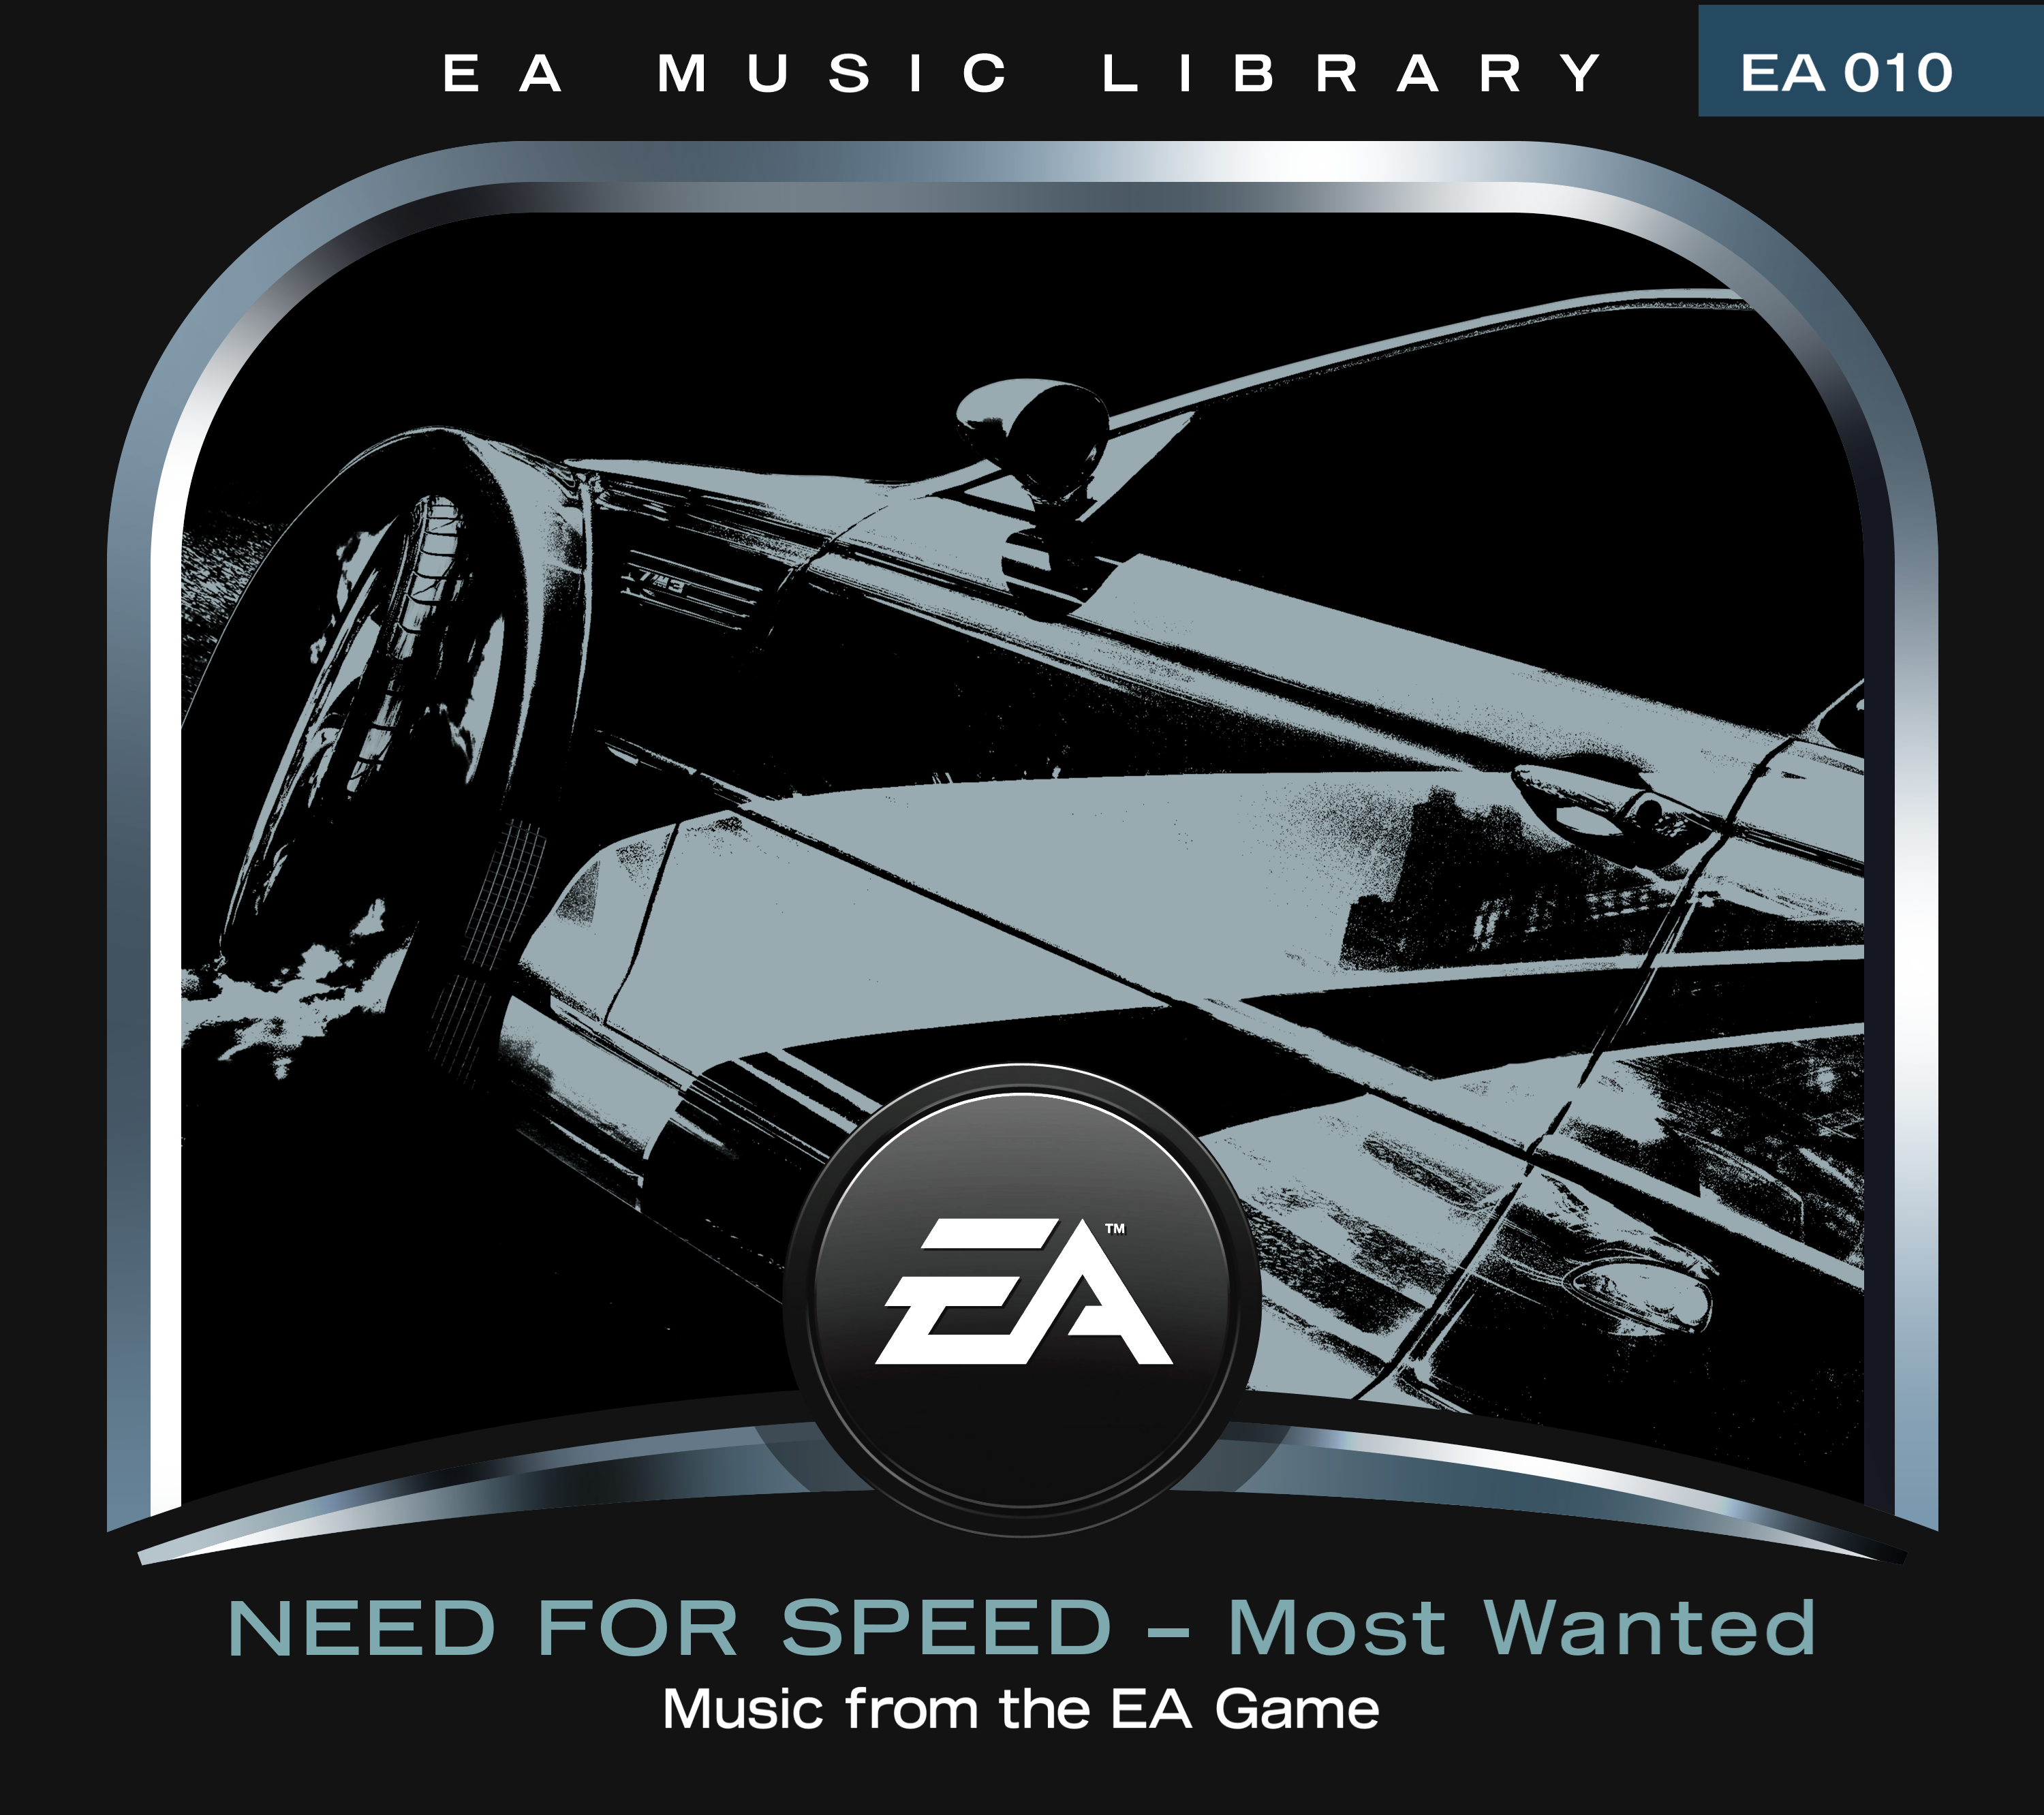 Need for speed most wanted песни. Need for Speed most wanted диск. NFS most wanted обложка. Need for Speed most wanted саундтреки. NFS MW OST.